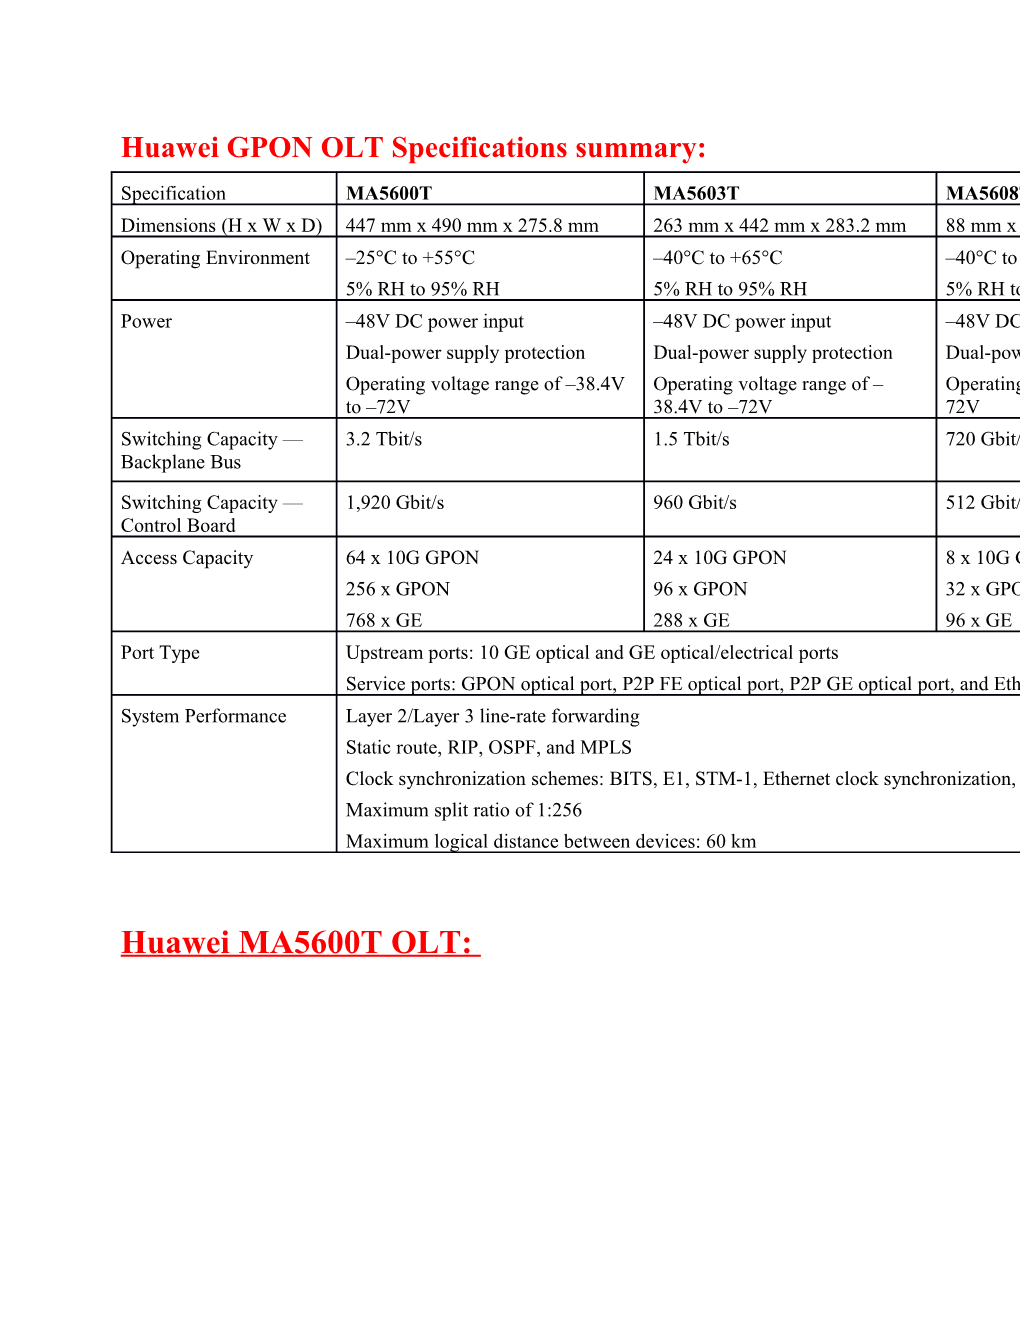 Huawei GPON OLT Specifications Summary